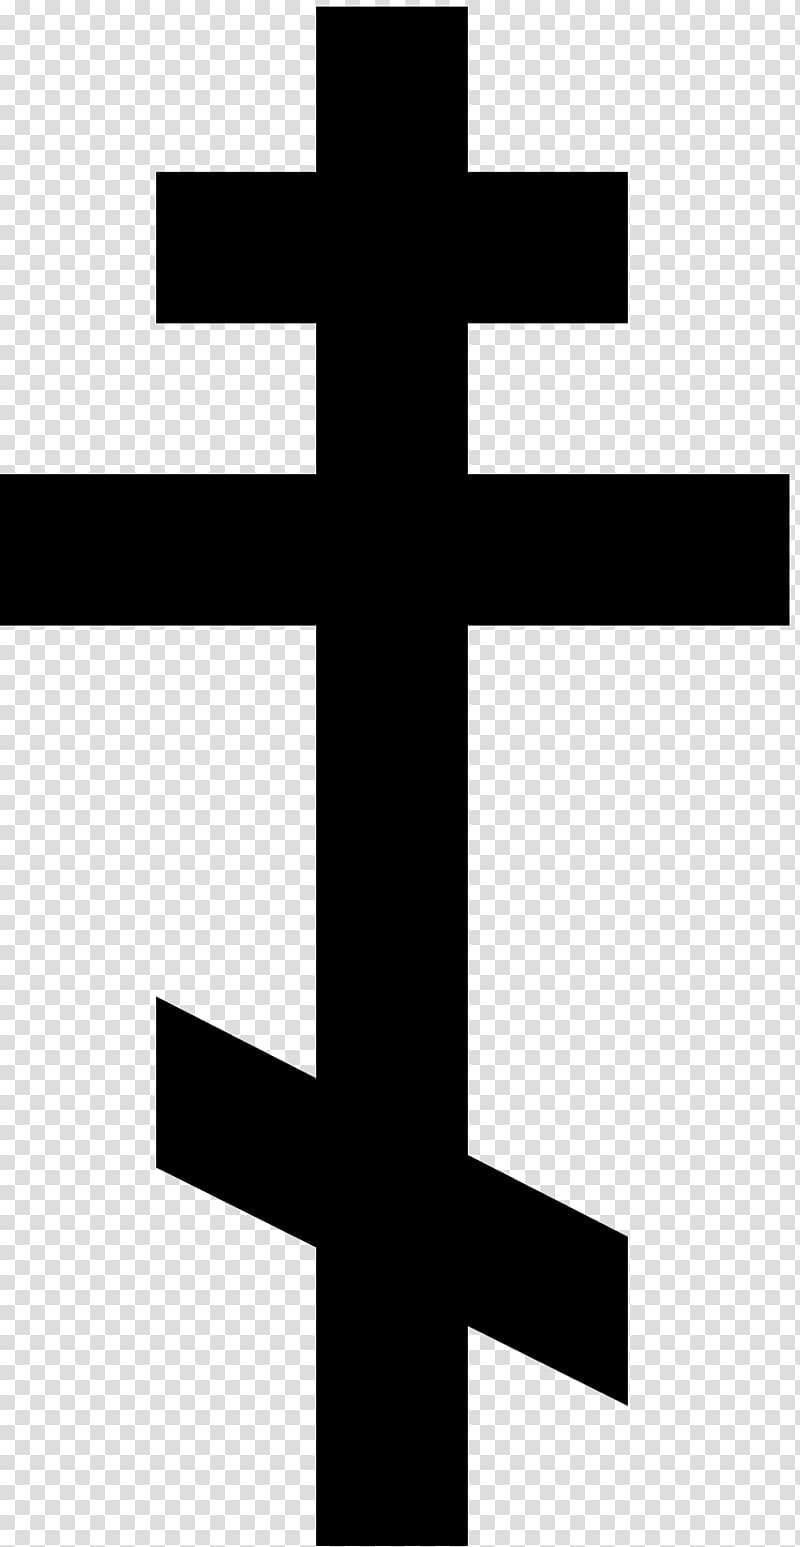 Russian Orthodox Church Russian Orthodox cross Eastern Orthodox Church Christian cross Patriarchal cross, Church transparent background PNG clipart